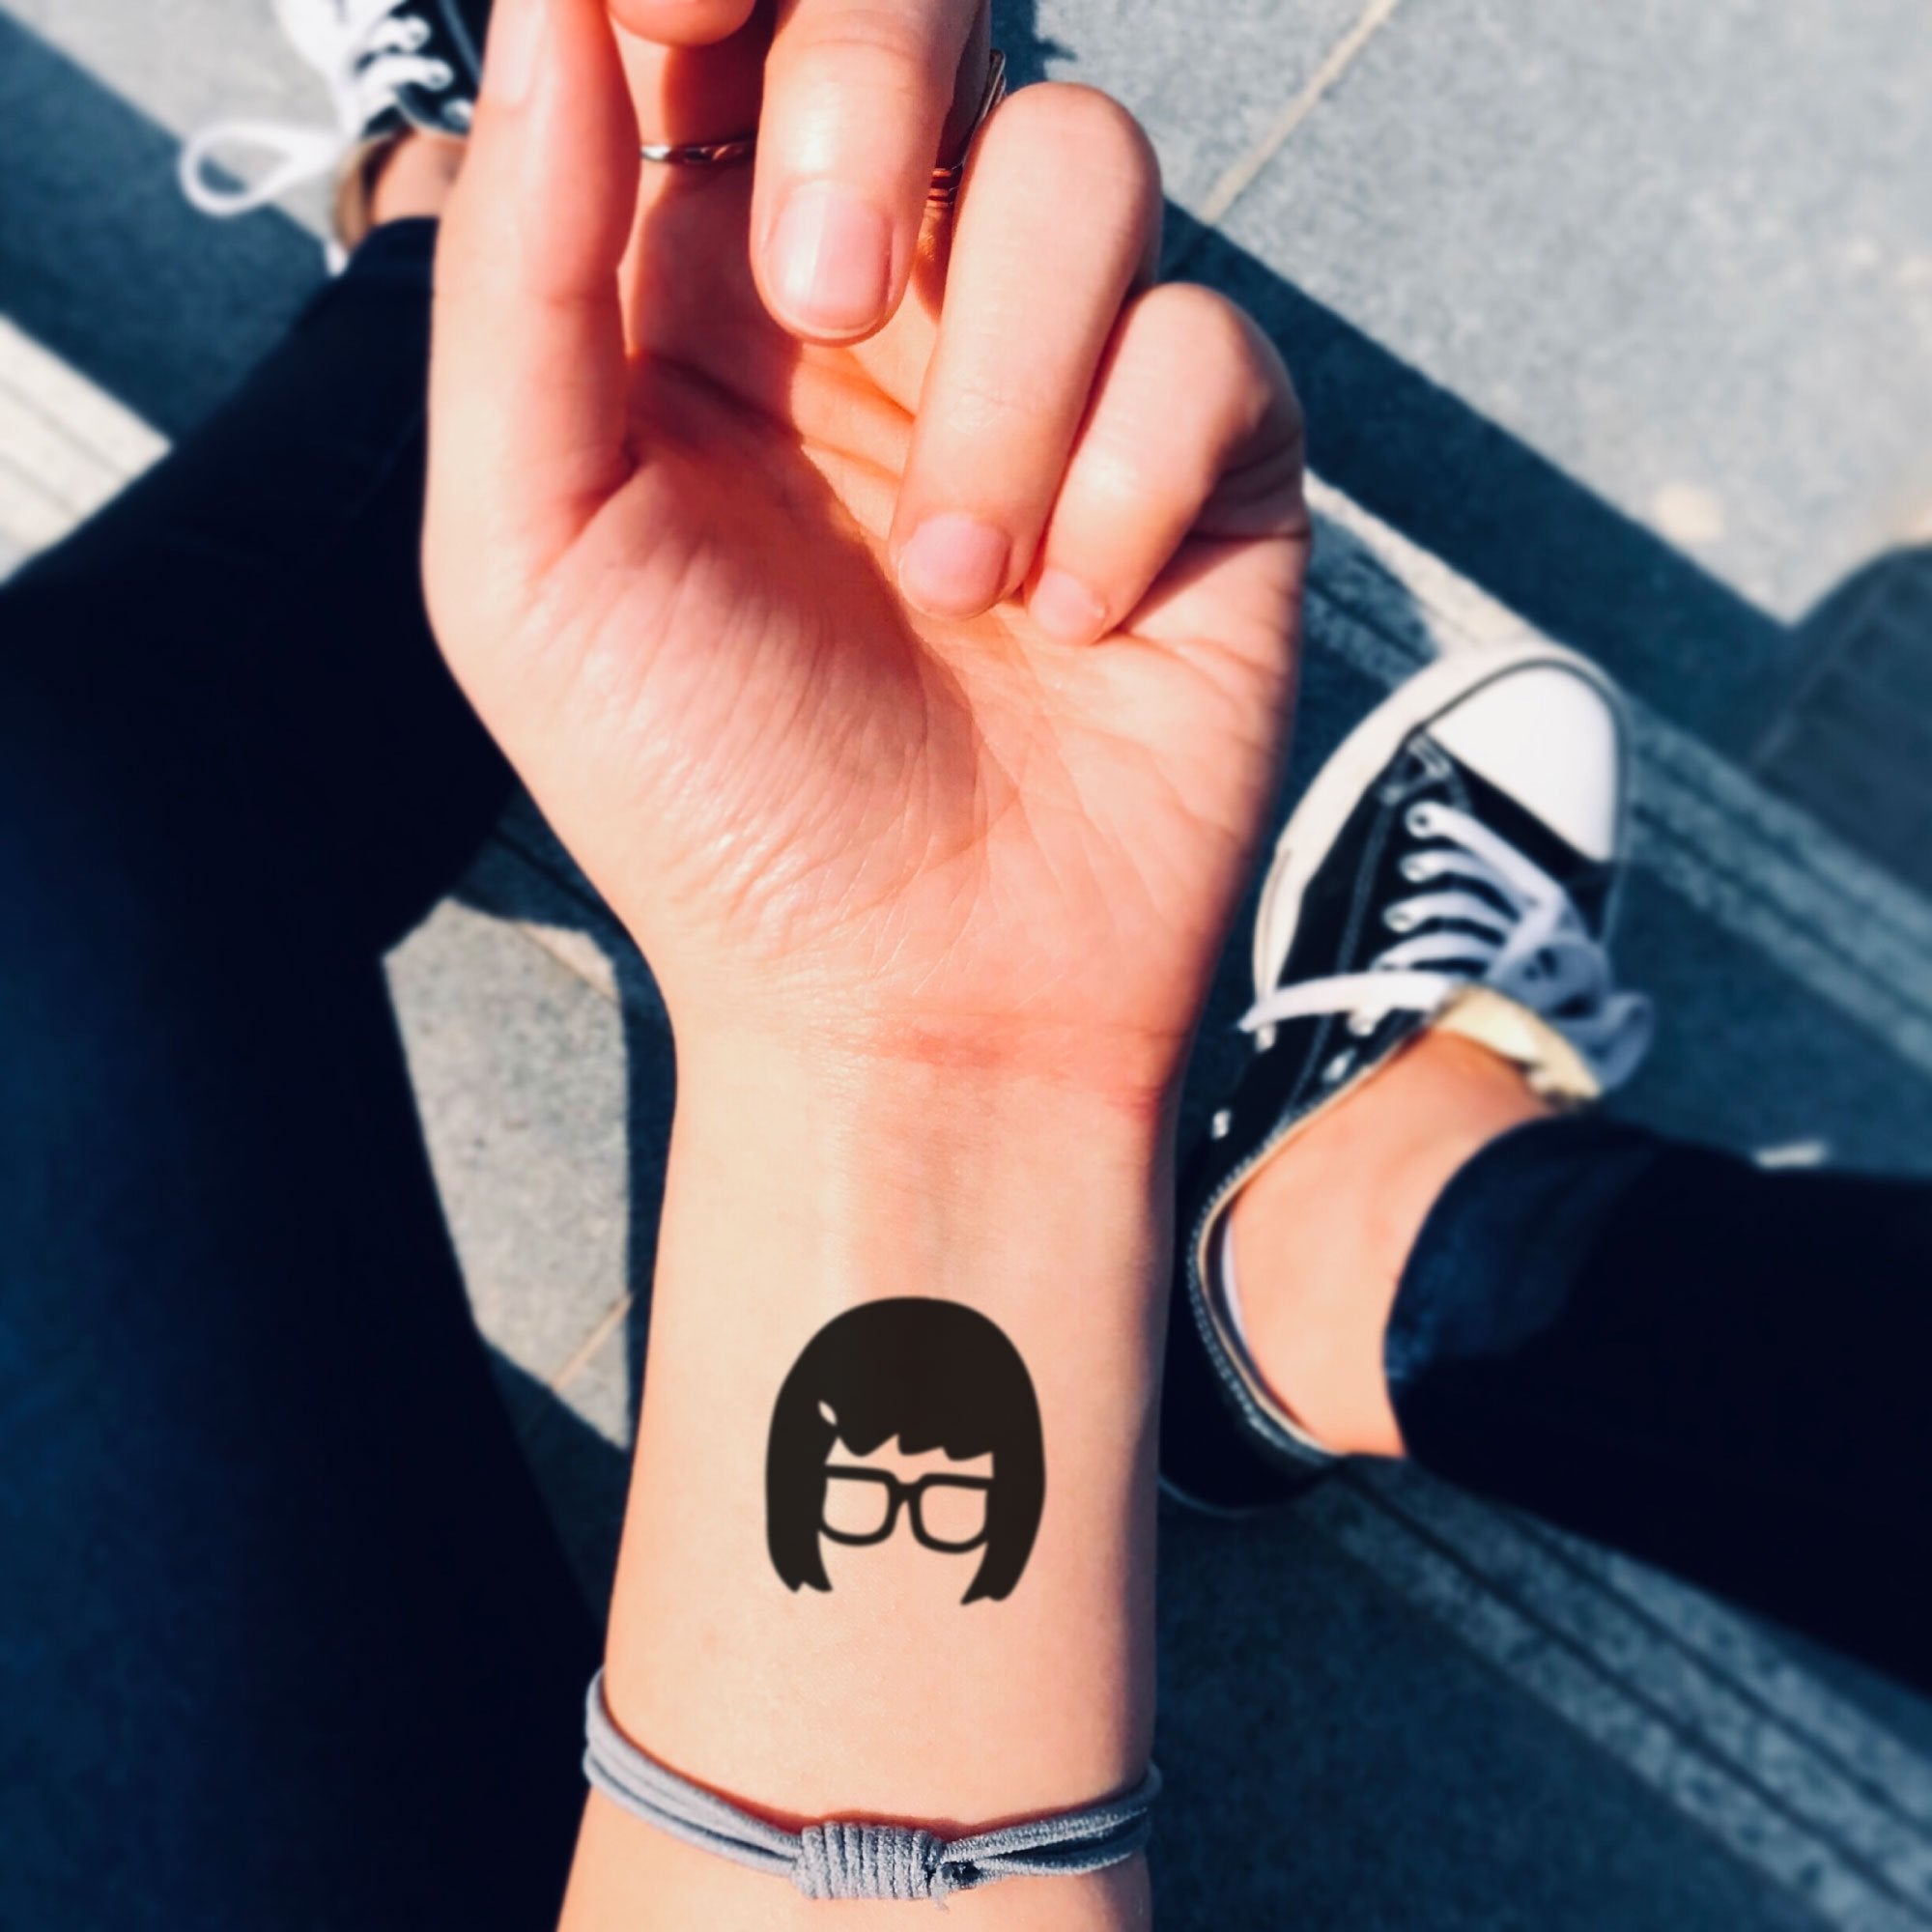 Girl with Glasses Temporary Tattoo Sticker - OhMyTat